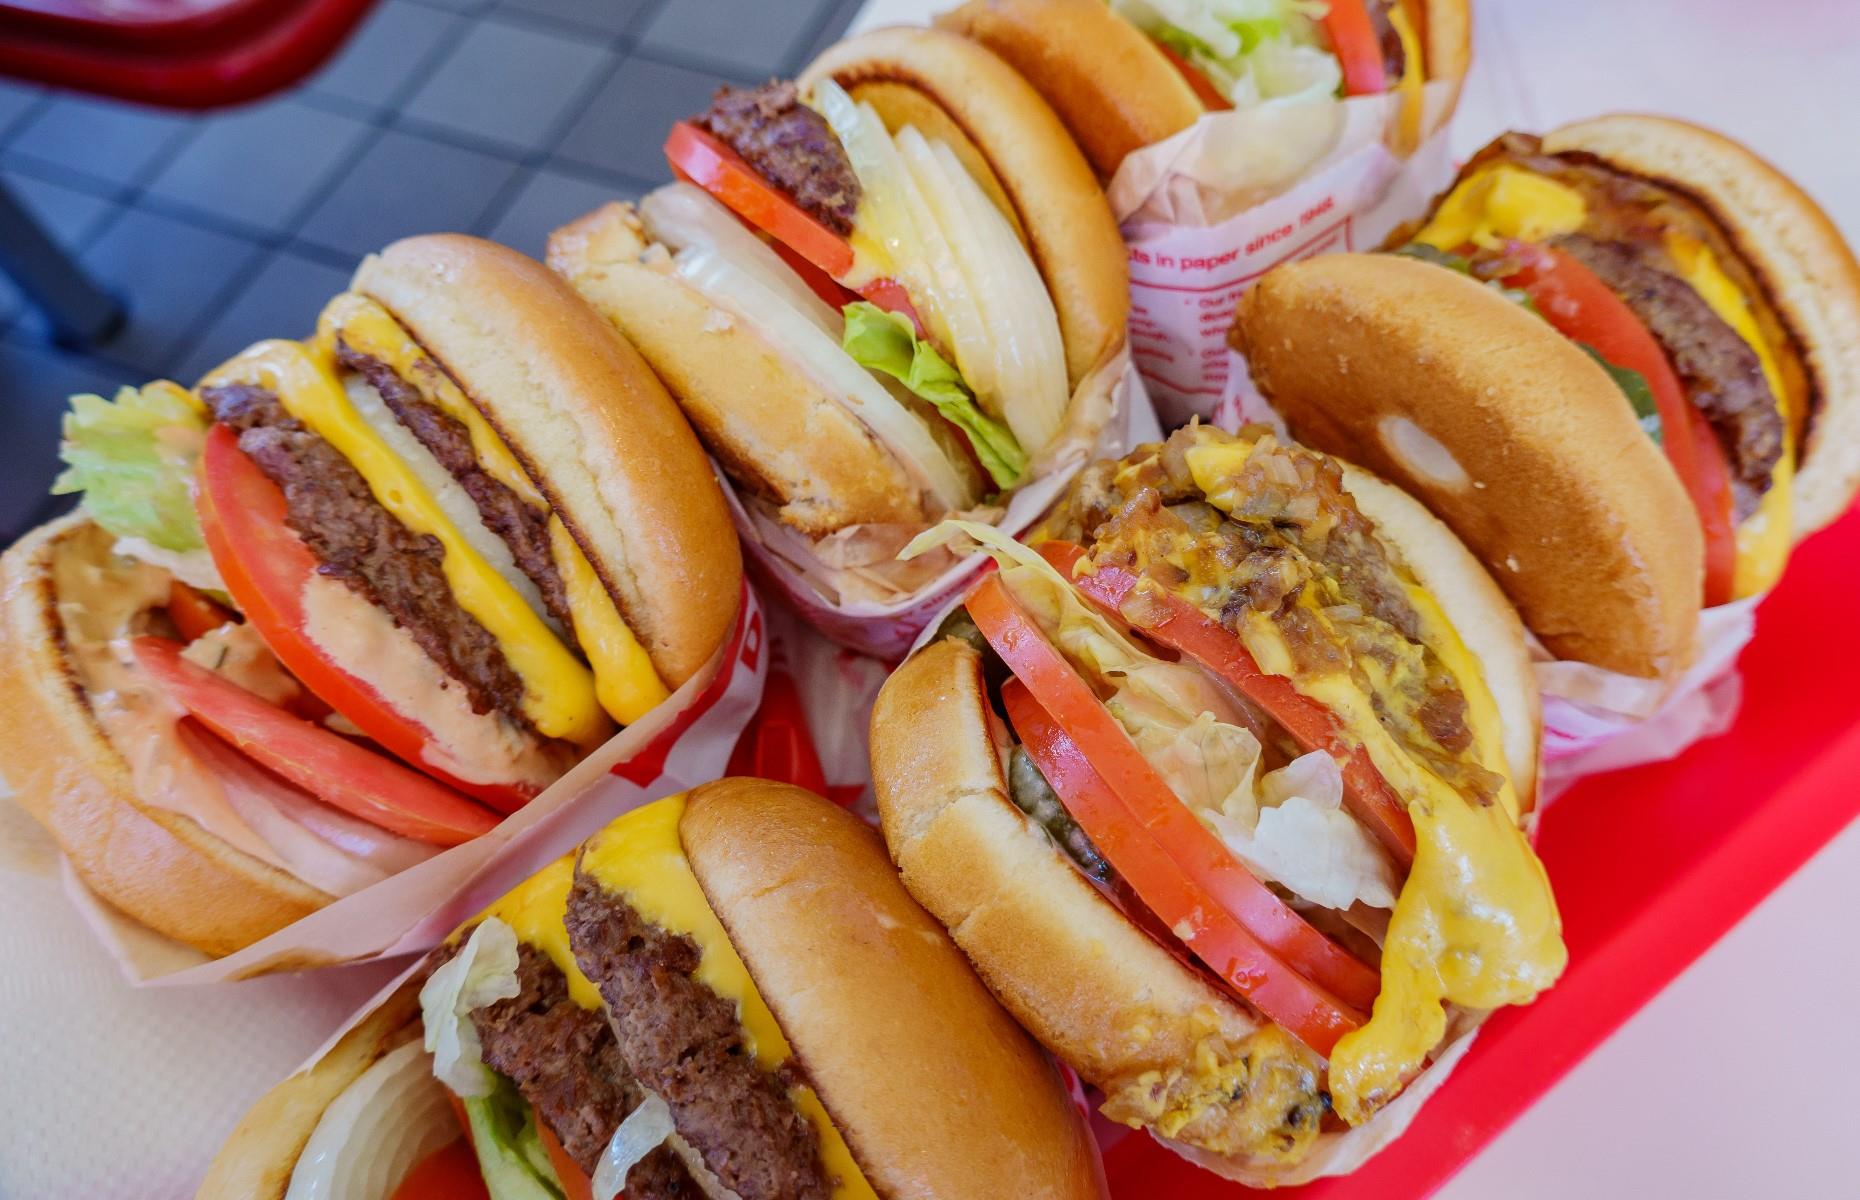 In-N-Out Burger coin: up to $100 (£82)